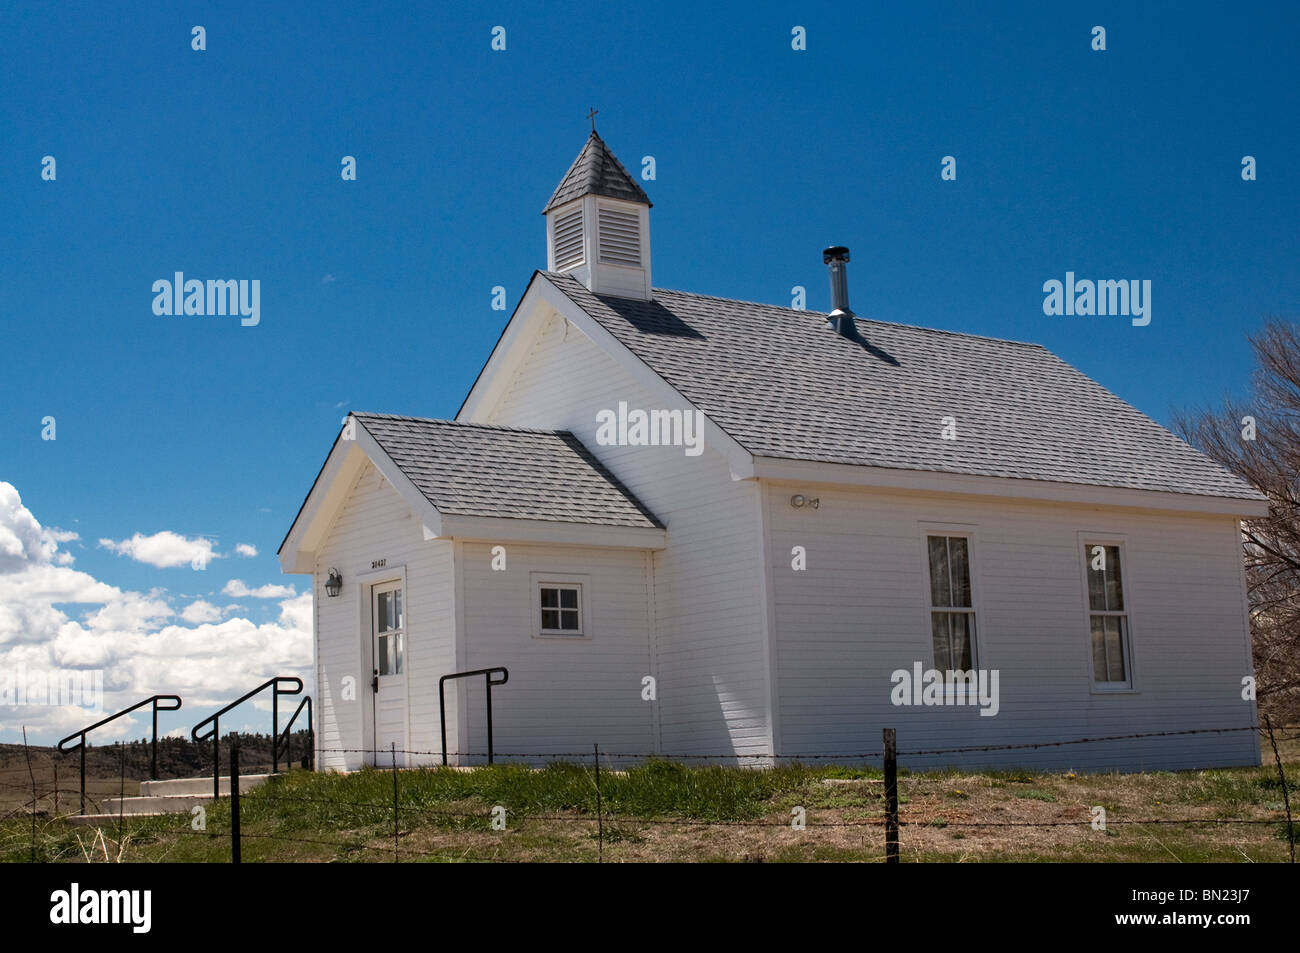 Old historic wooden white clapboard church in Virgina Dale Colorado Stock Photo